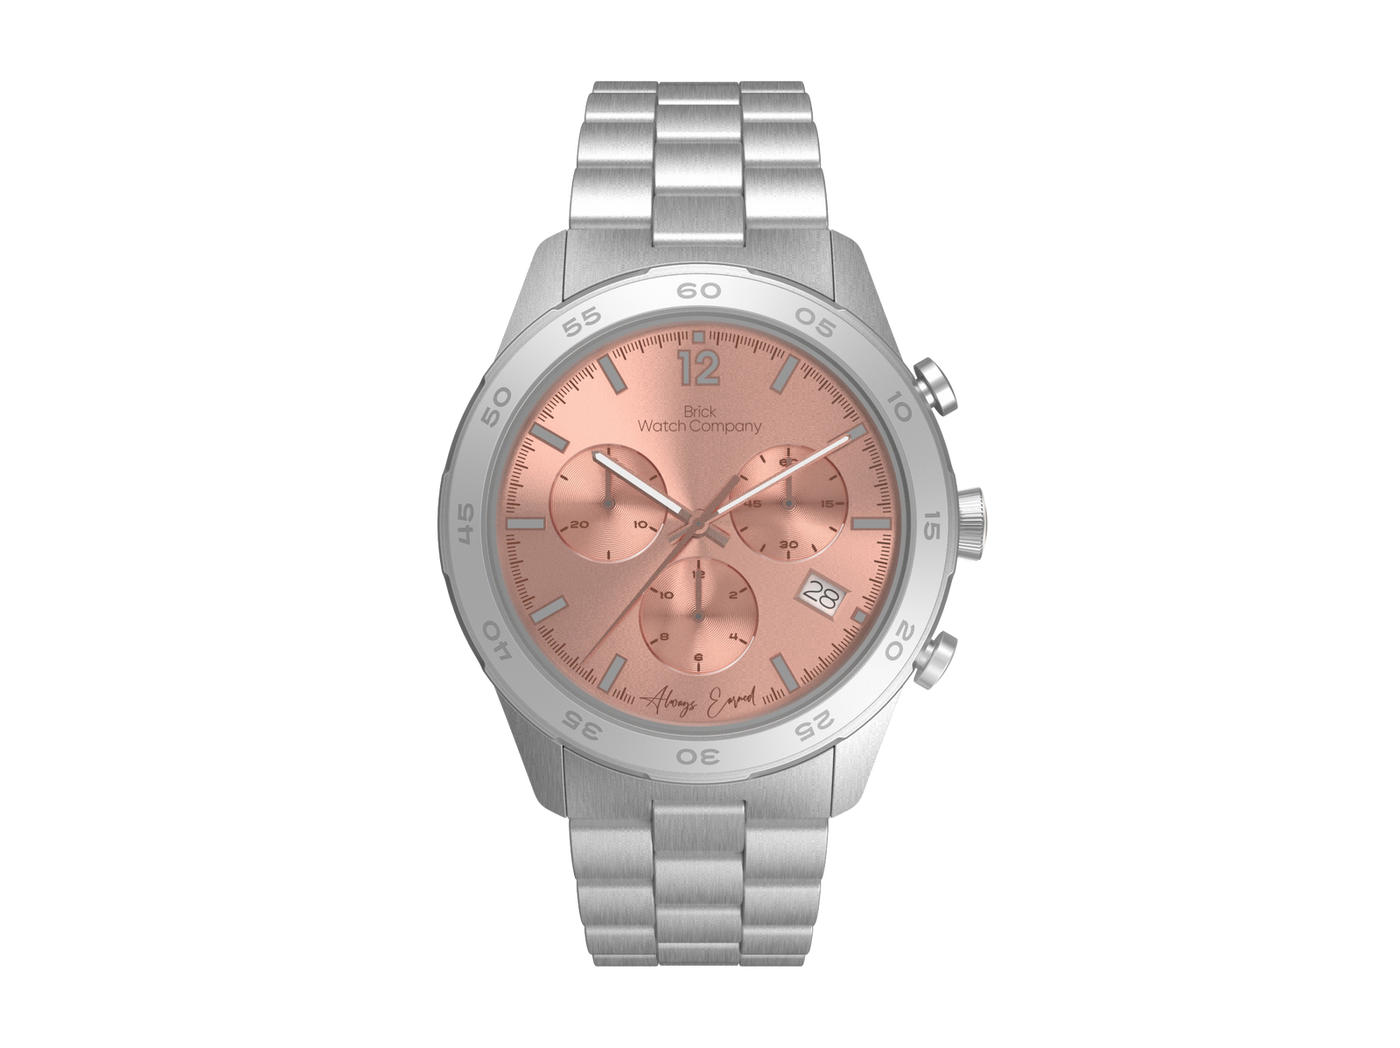 Chrono-Diver - Silver Case, Rose Dial, Gray Lumi Numbers